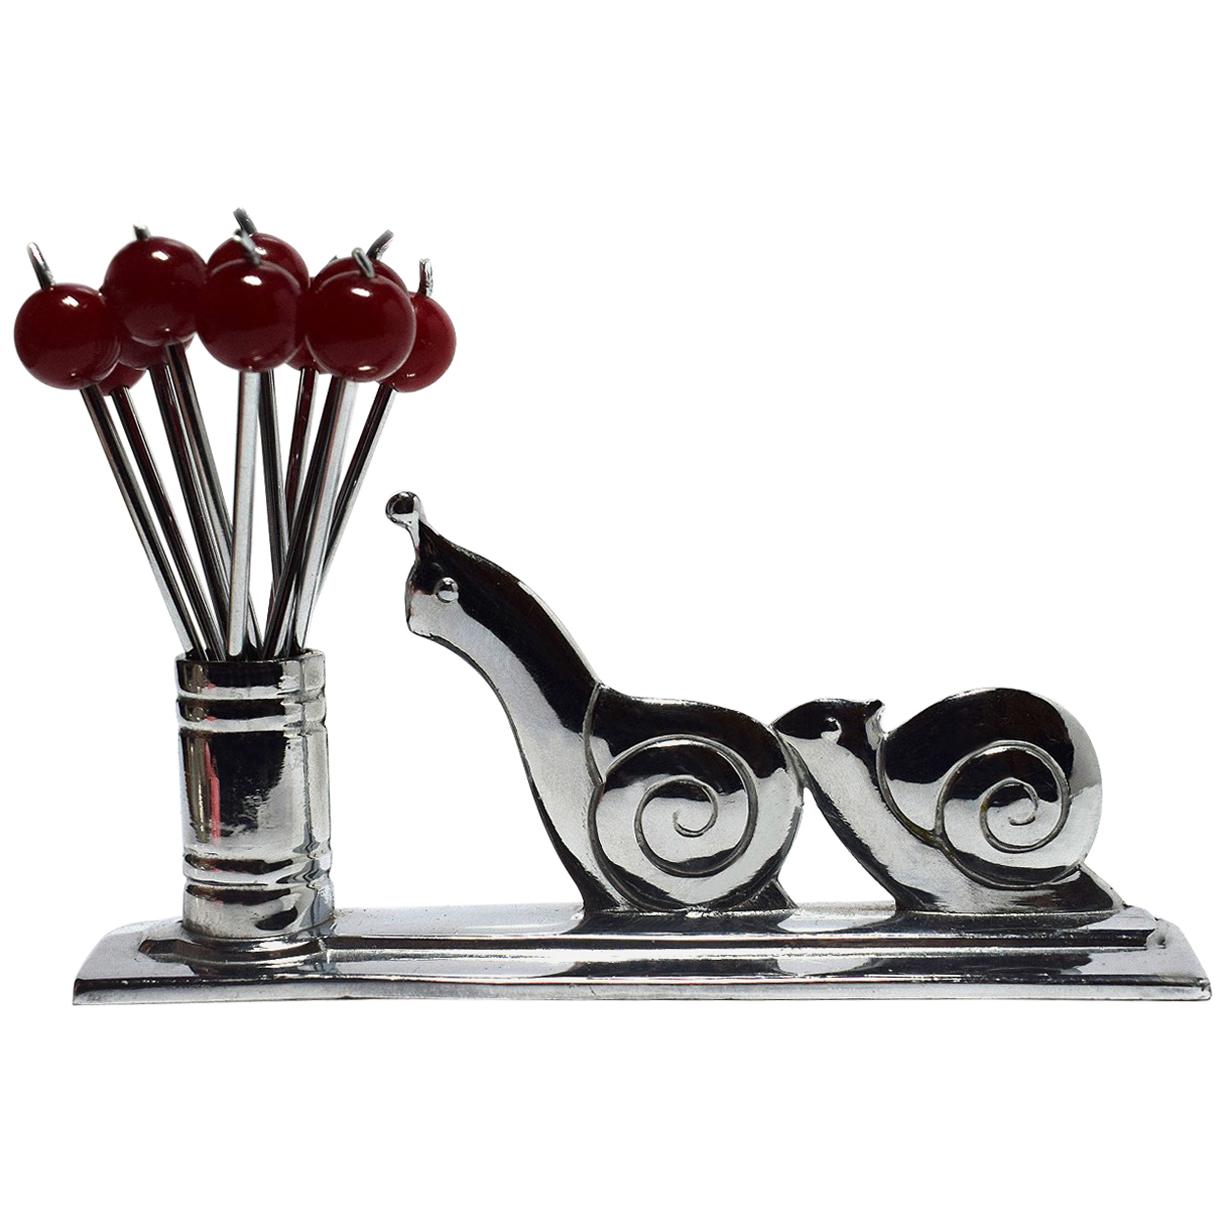 1930s French Art Deco Novelty Chrome Cocktail Stick Holder with Chasing Snails